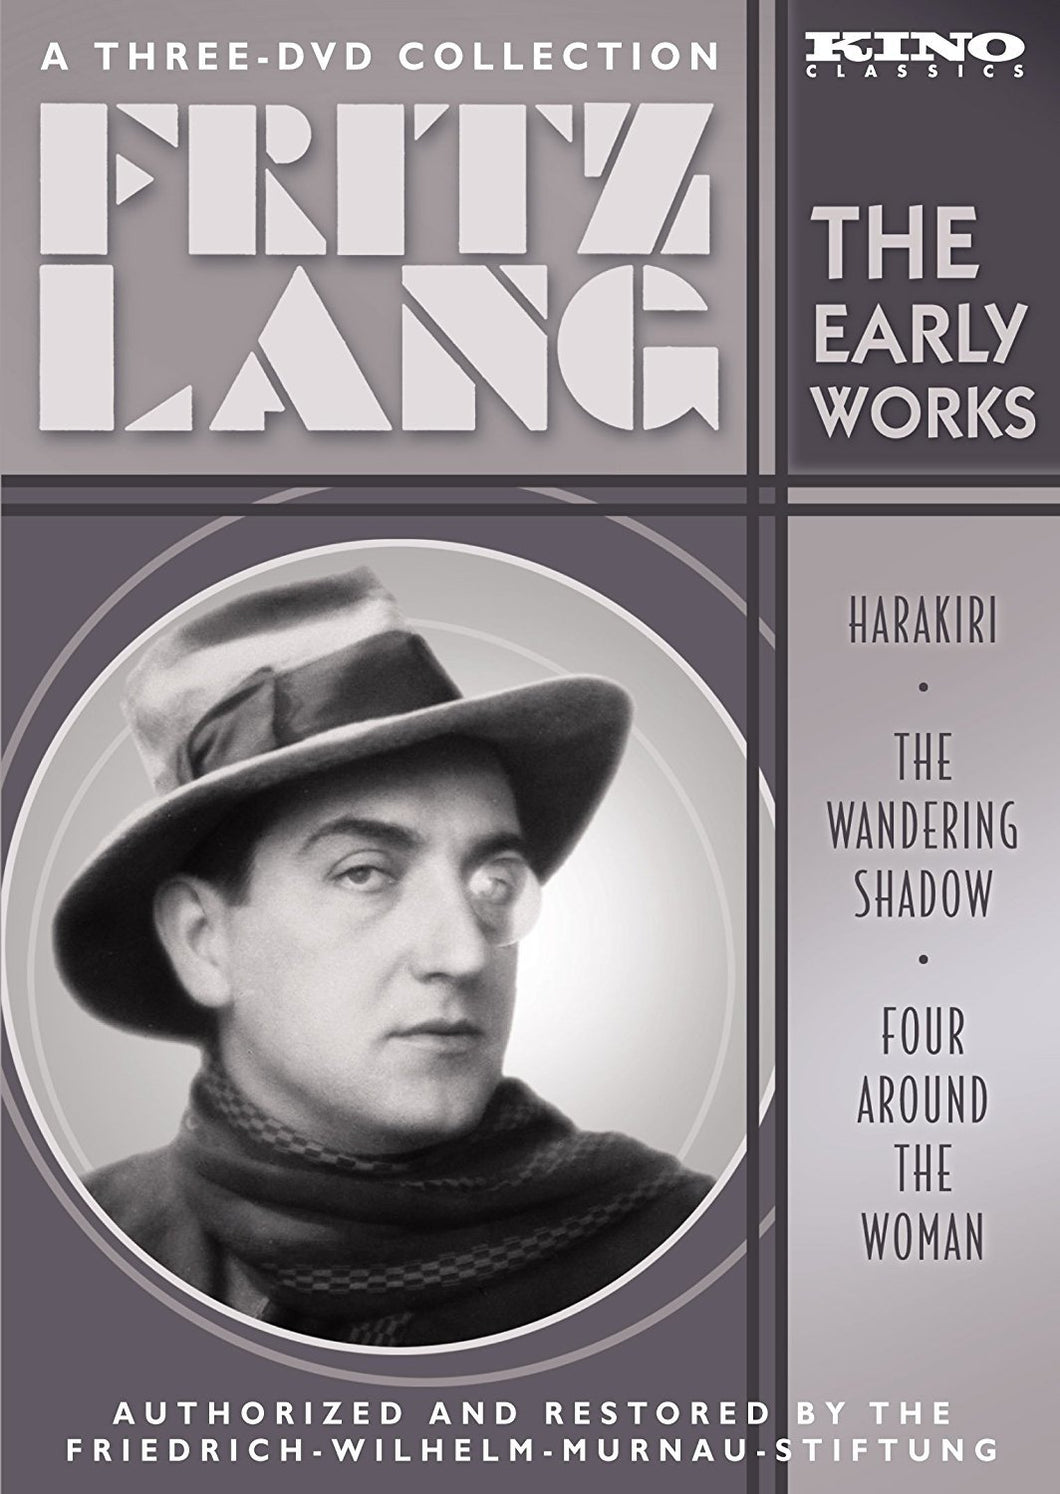 Fritz Lang The Early Works (1919-1921) - front cover